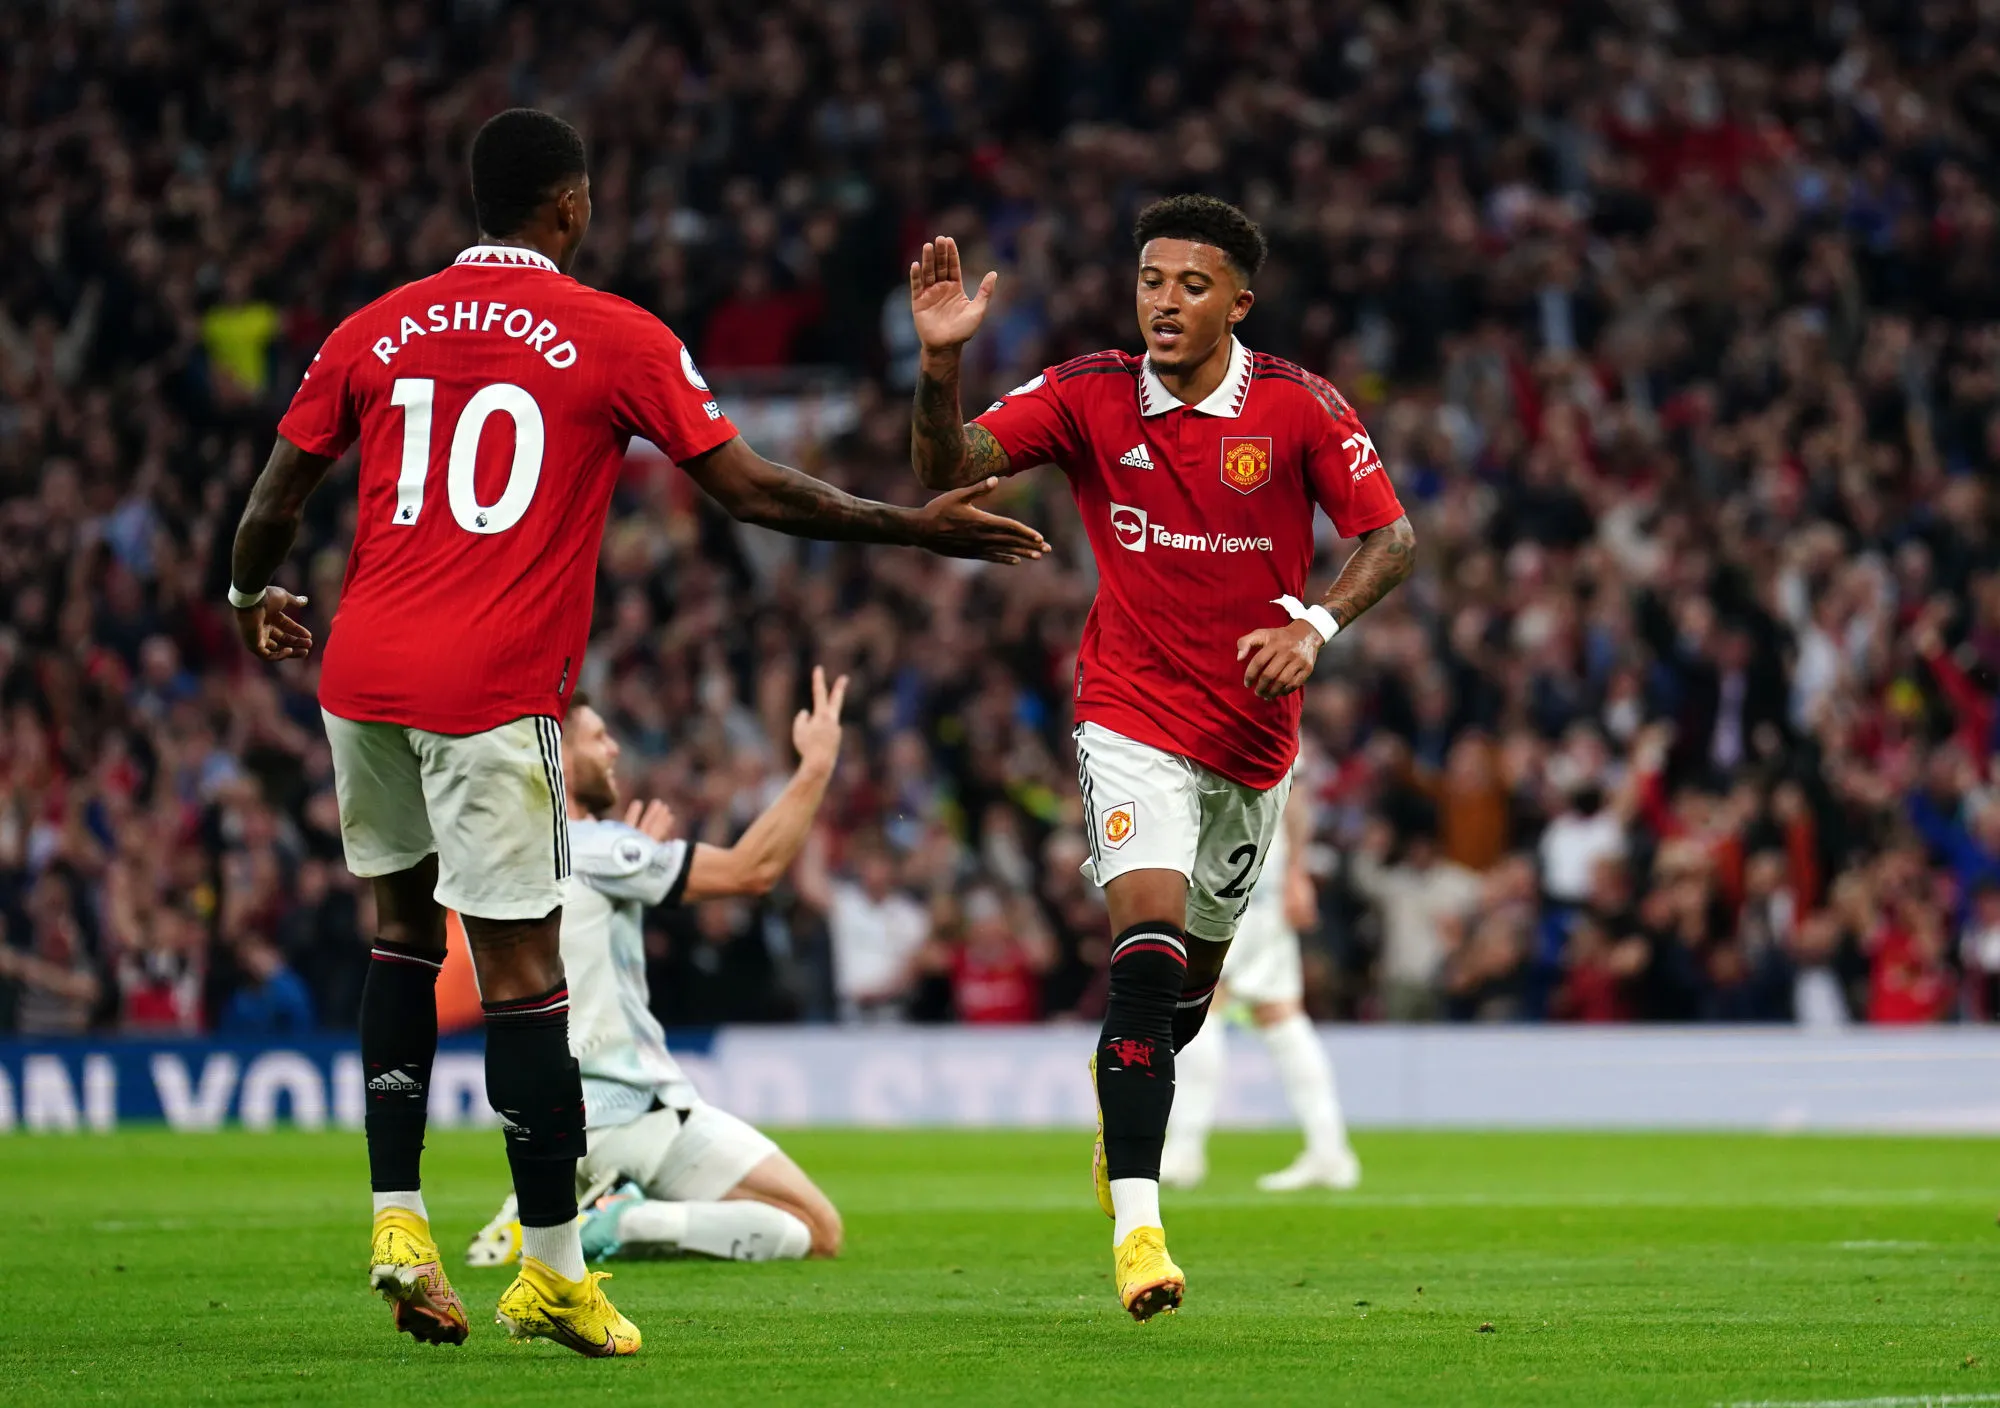 Manchester United's Jadon Sancho celebrates scoring their side's first goal of the game during the Premier League match at Old Trafford, Manchester. Picture date: Monday August 22, 2022. - Photo by Icon sport